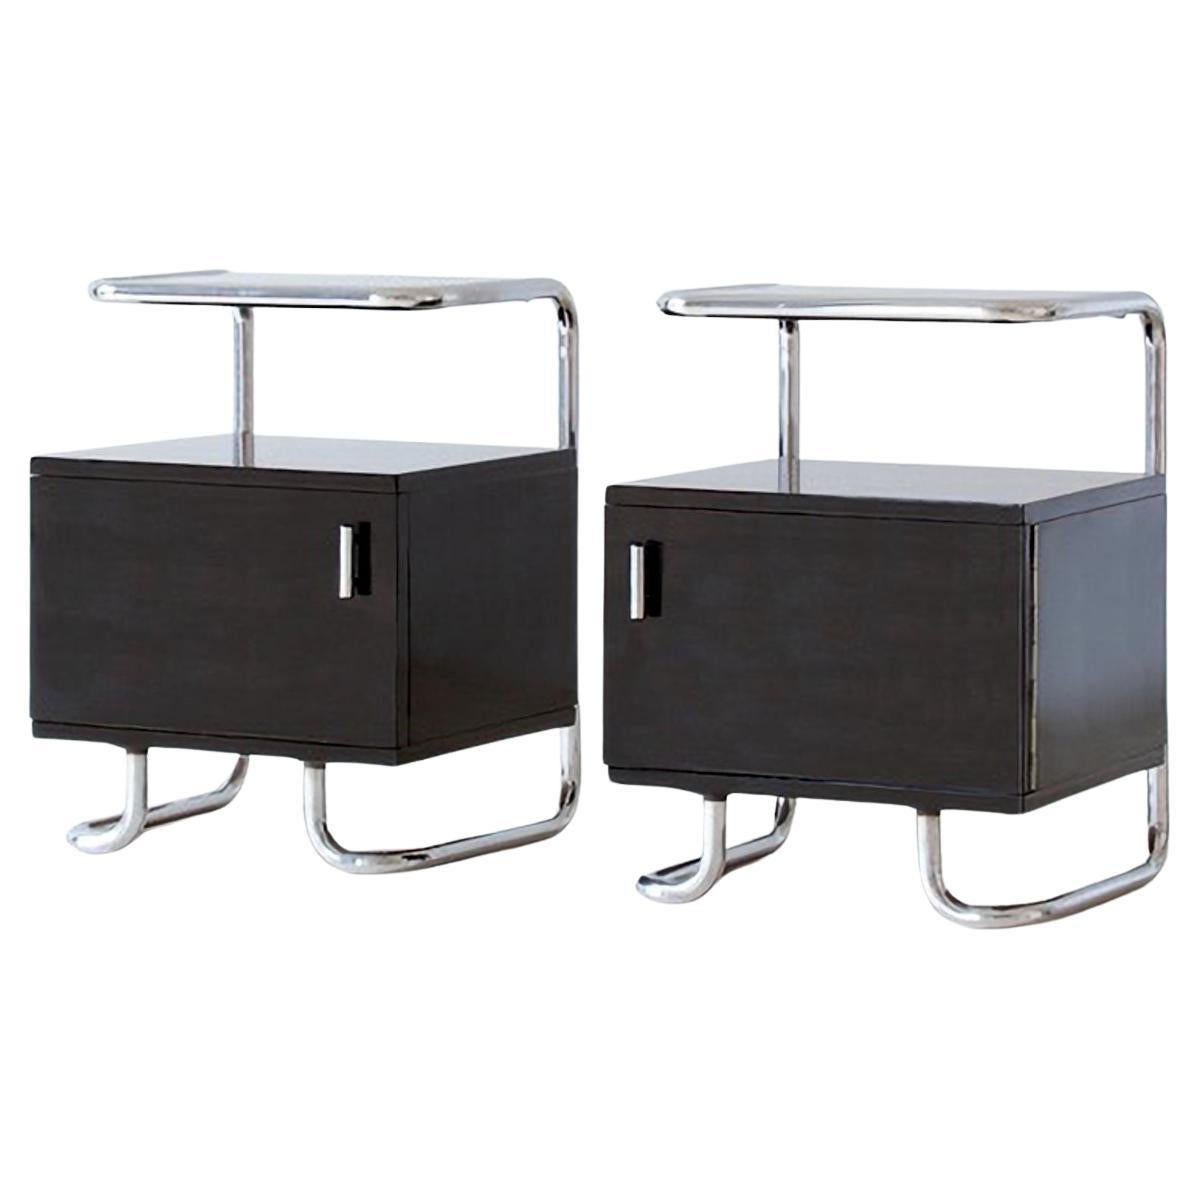 Art Deco Bedside Cabinets in Black Glossy Lacquered Wood and Chromed Steel, 1930 For Sale